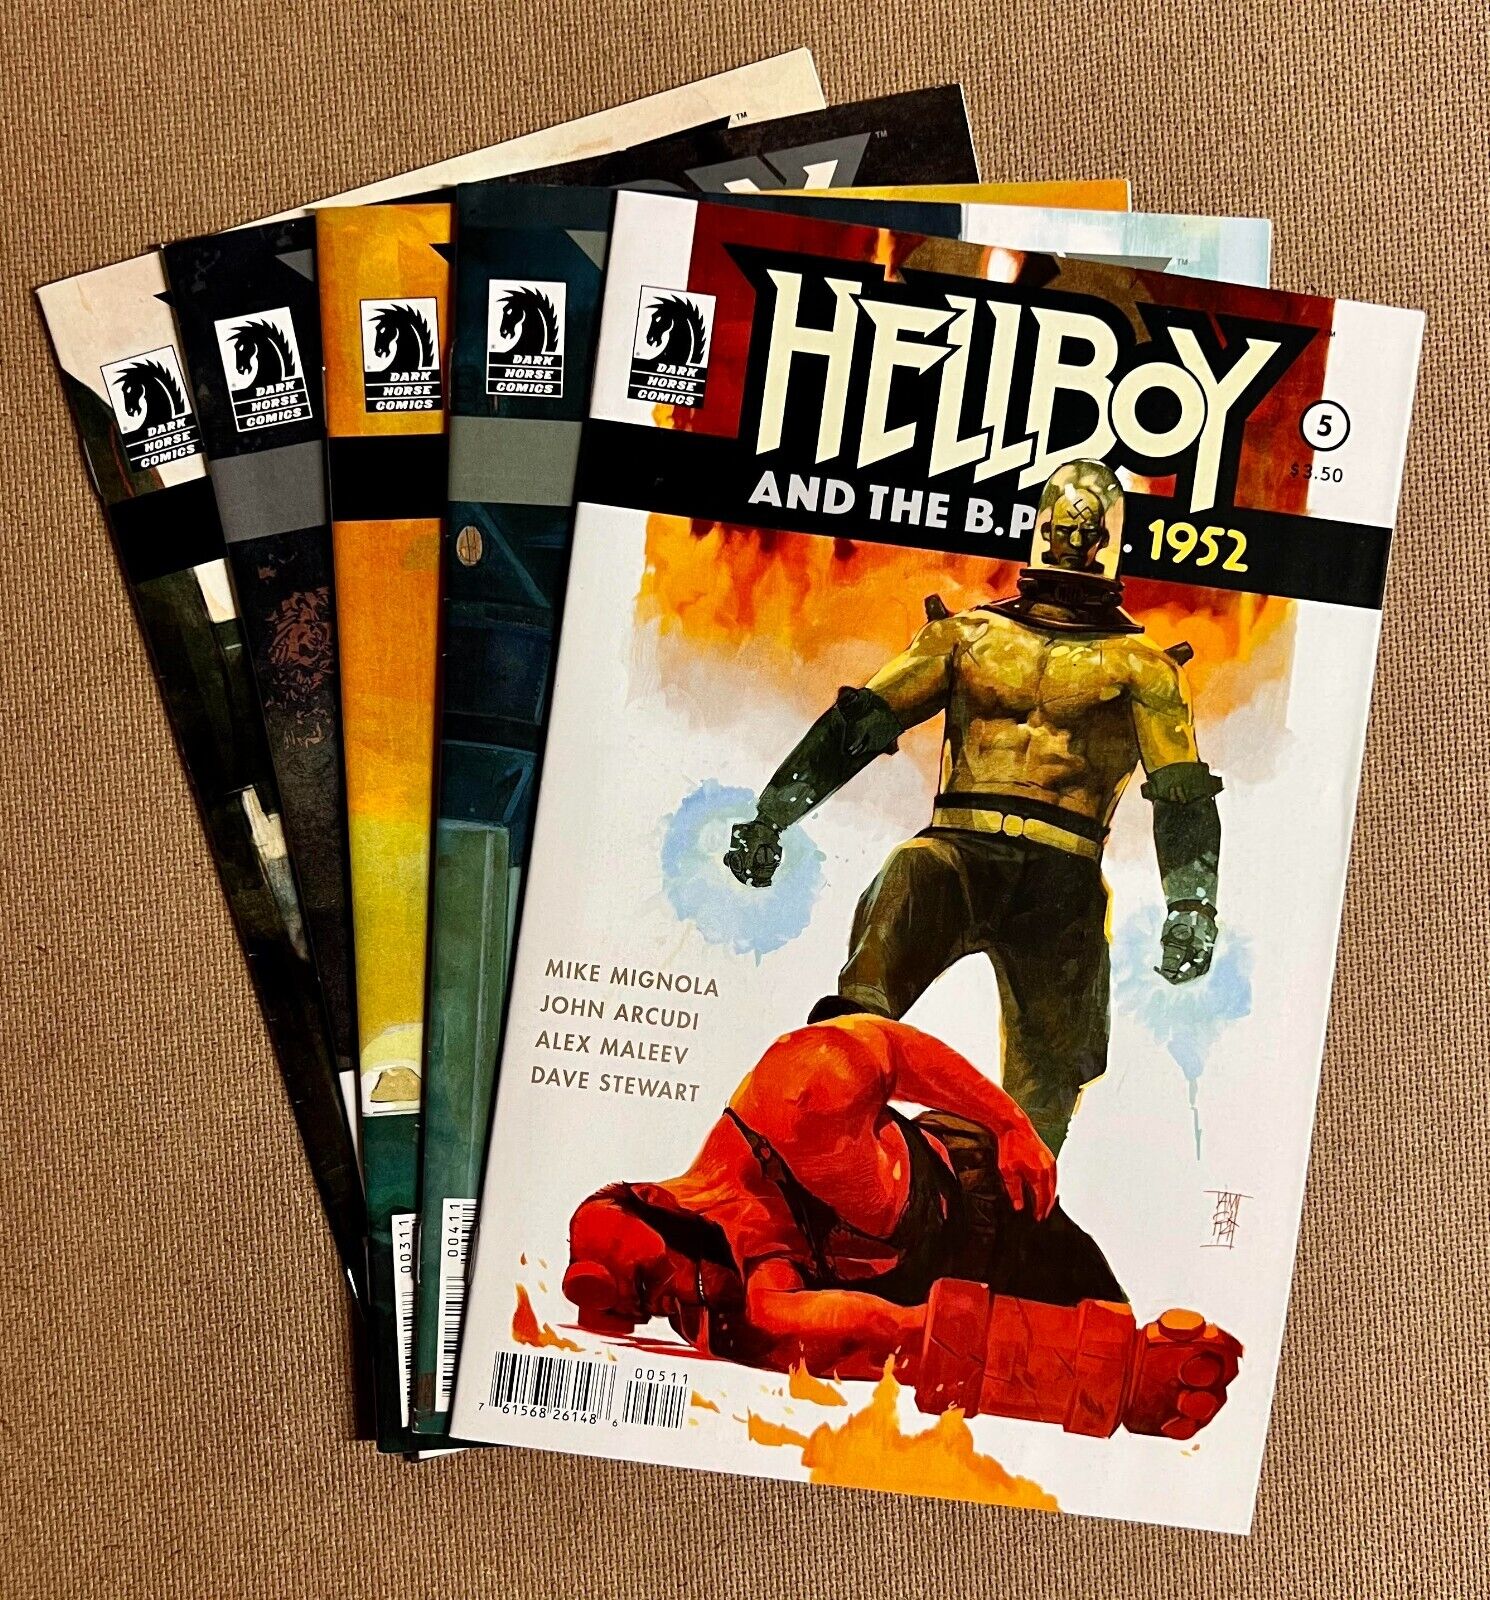 Hellboy and the B.P.R.D. 1952 #1 thru #5 (2014) - Complete Run